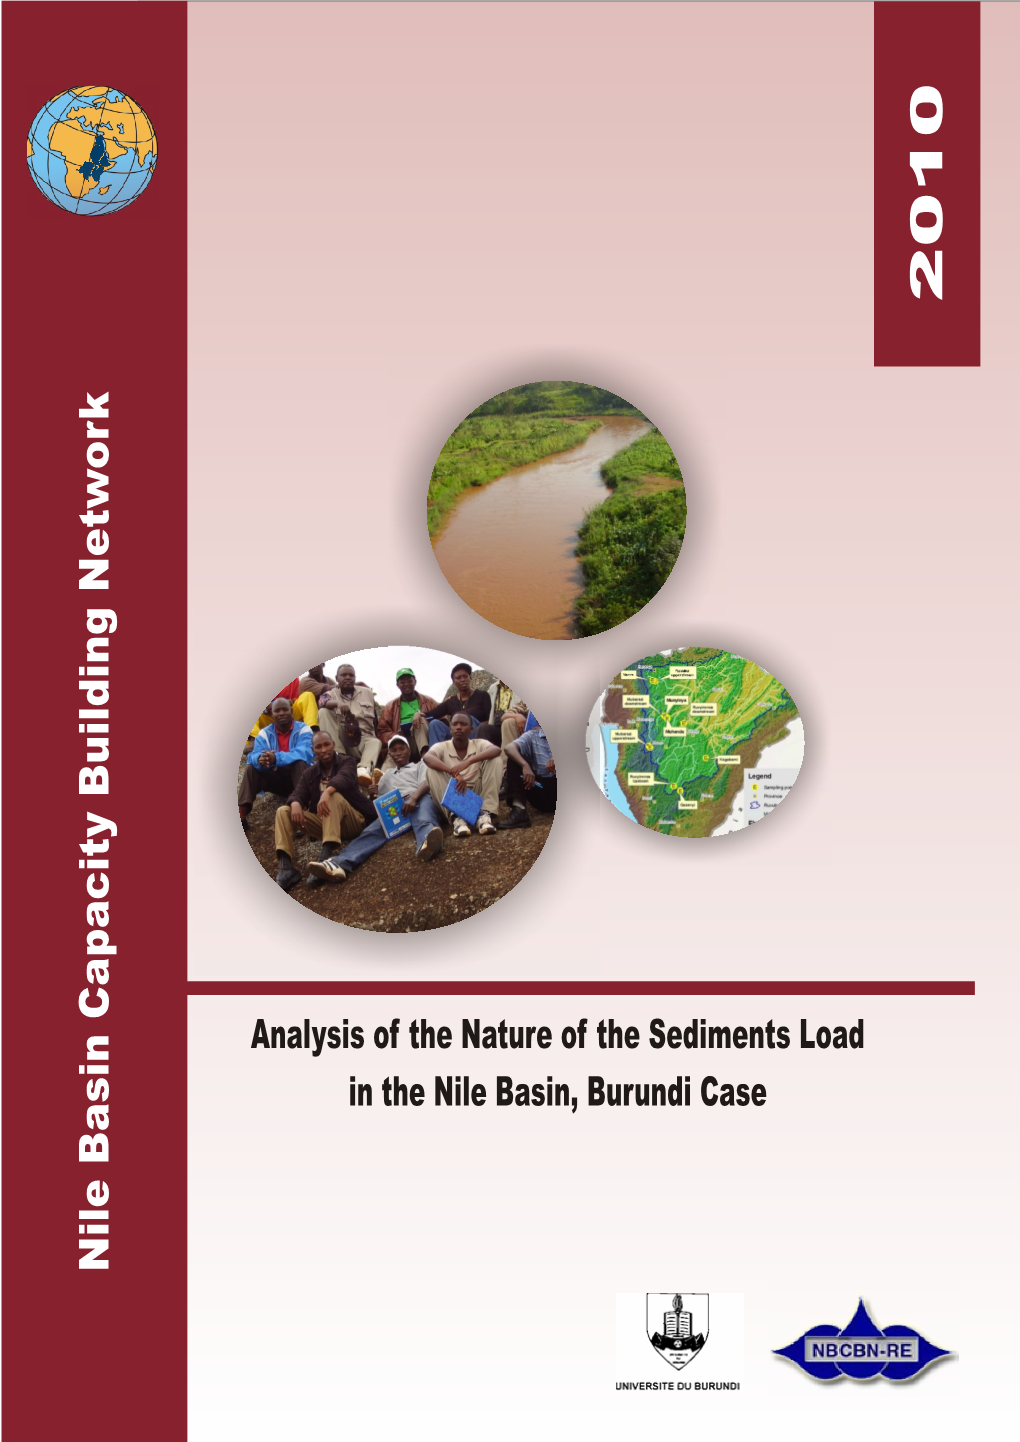 15. Analysis of the Nature of the Sediments Load in the Nile Basin